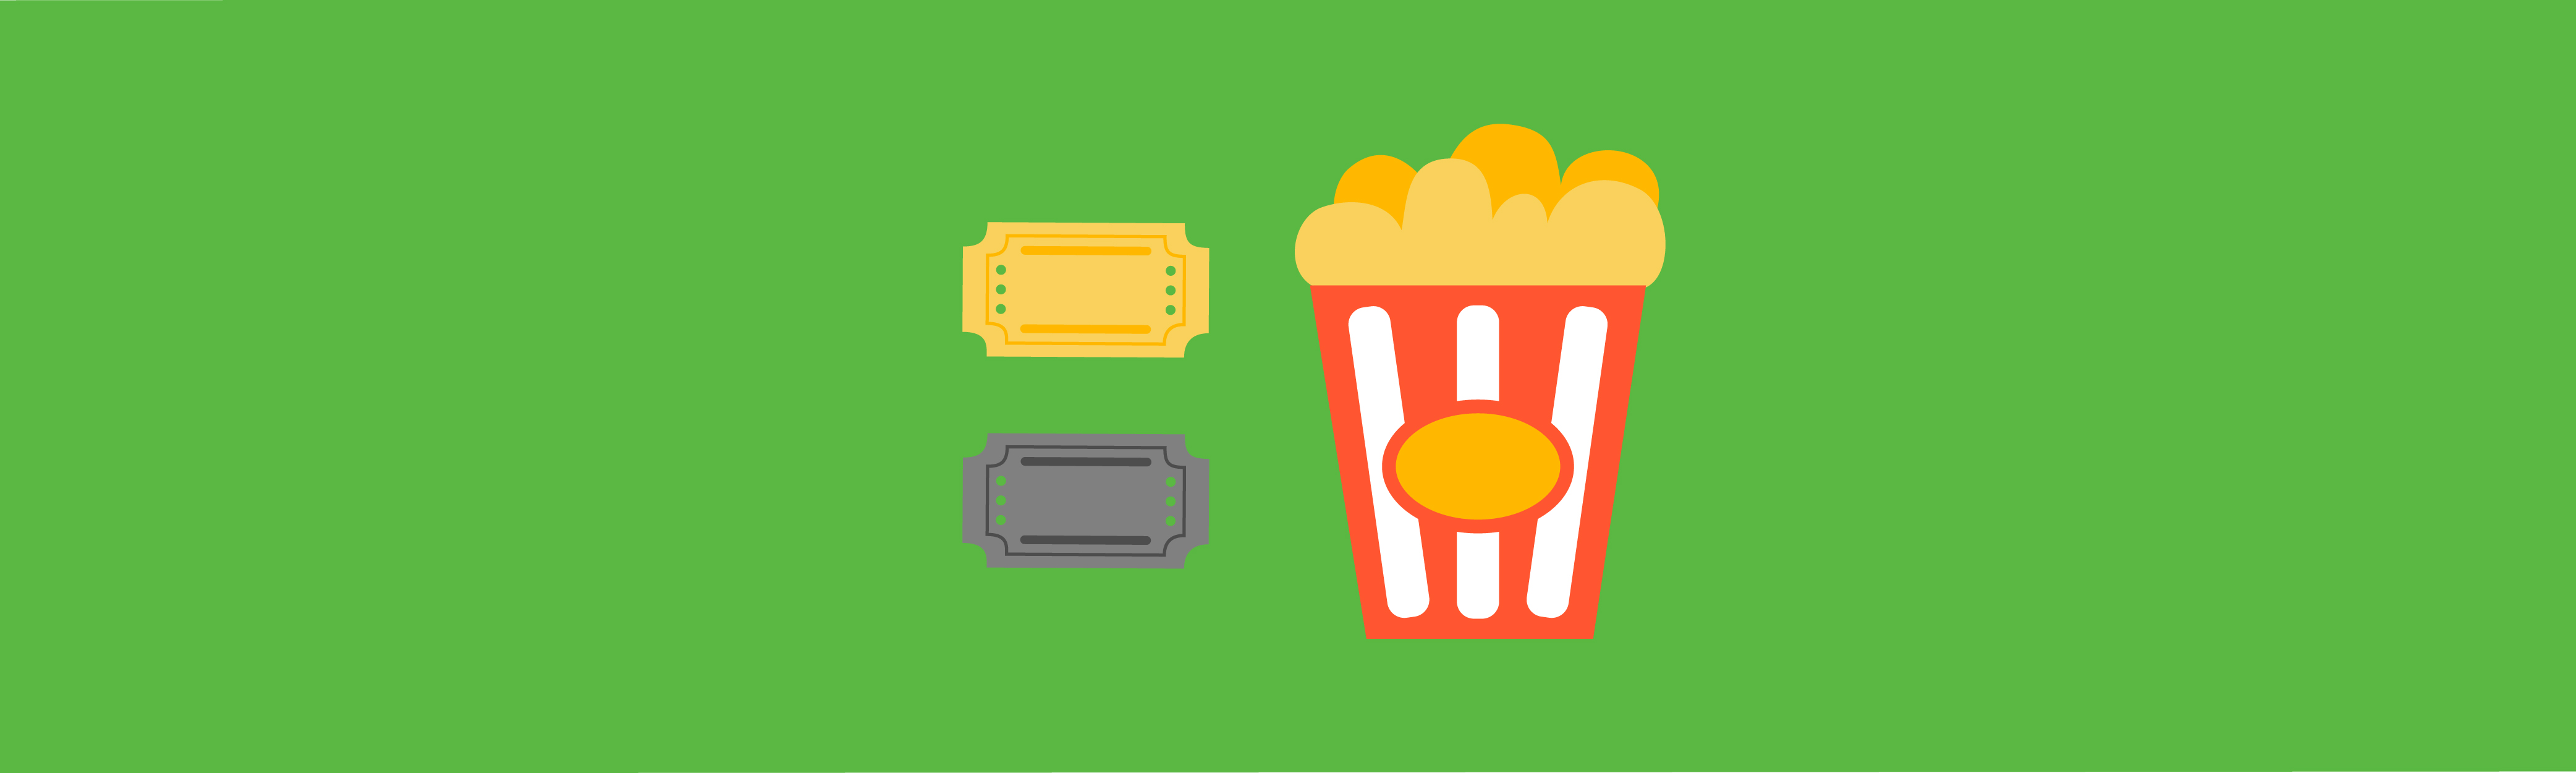 Colourful illustration of movie tickets and popcorn